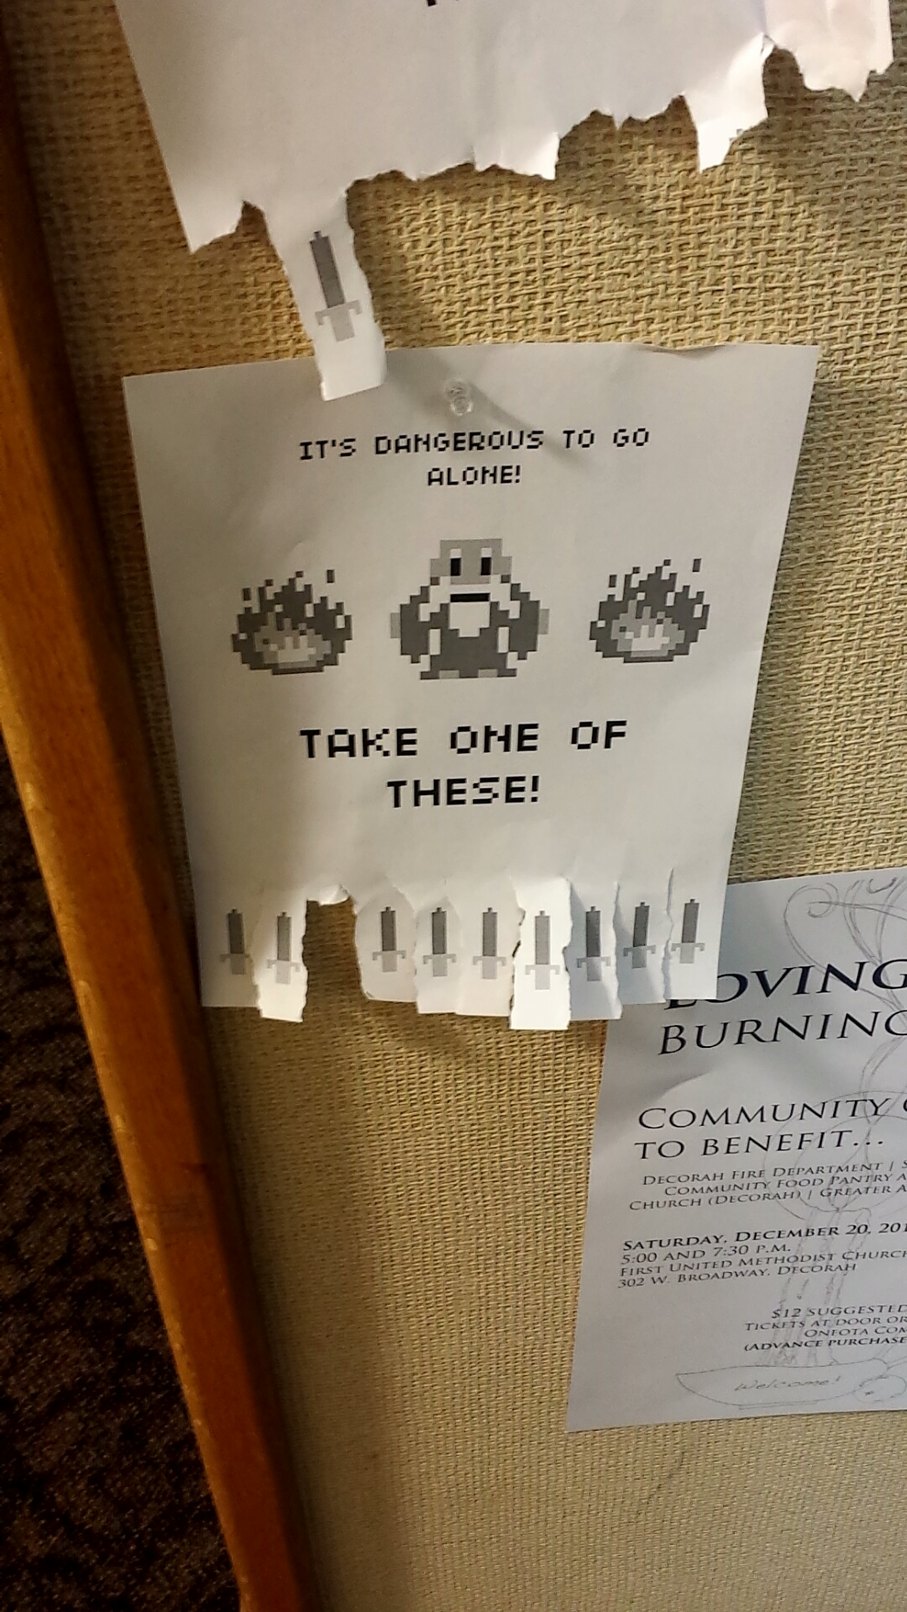 Posted in my college's music building - meme